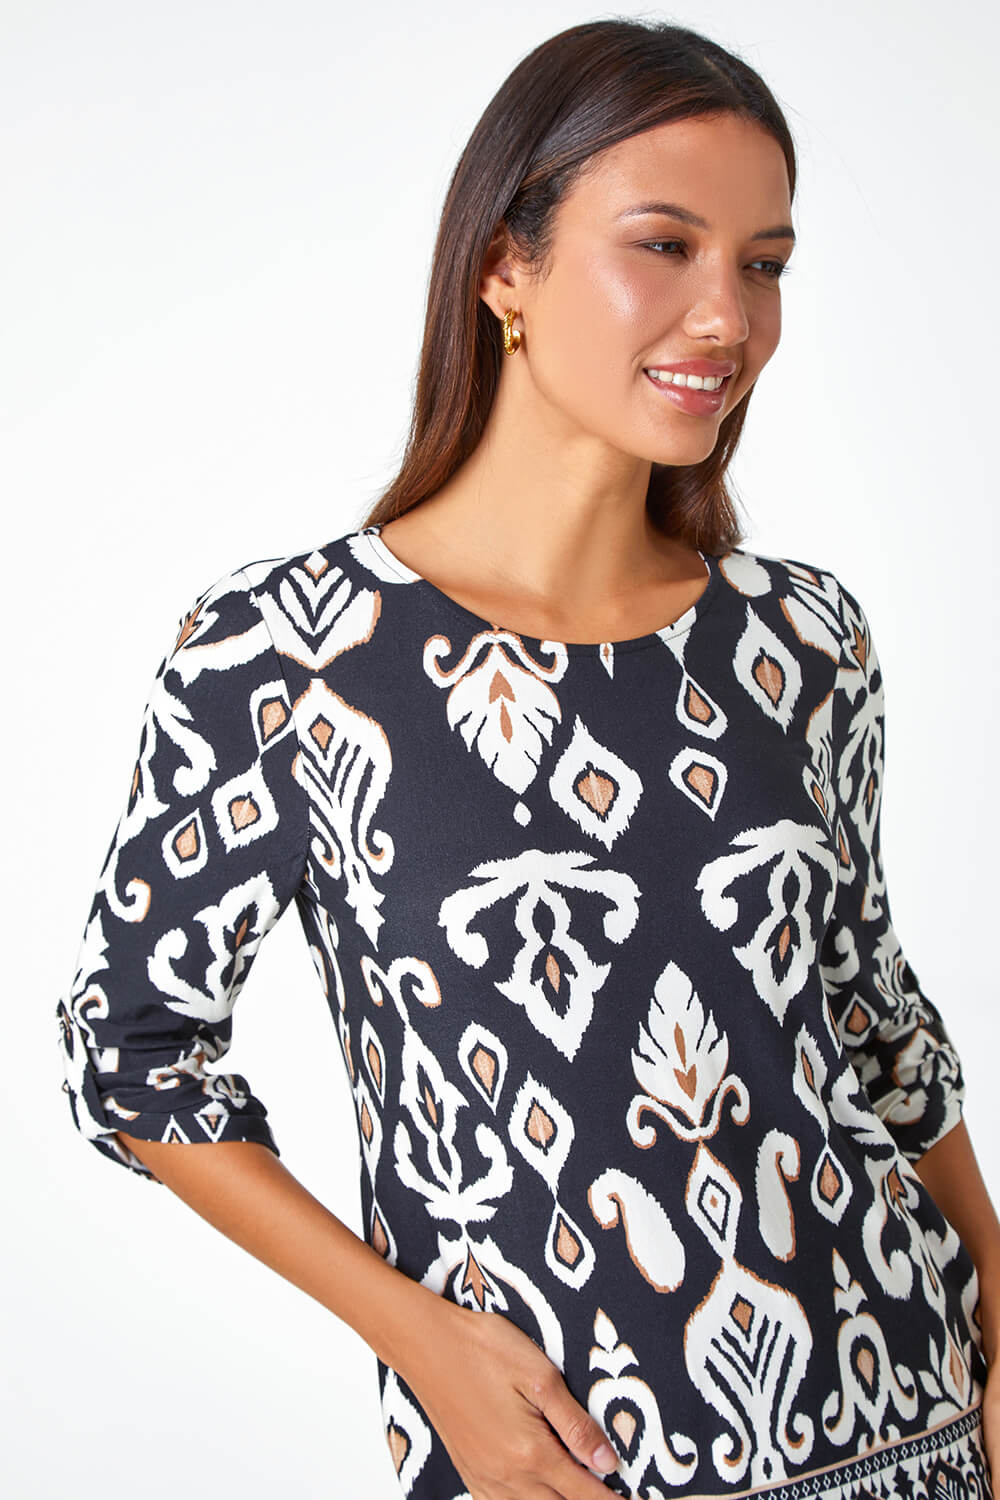 Neutral Aztec Border Print Tunic Stretch Top, Image 4 of 5